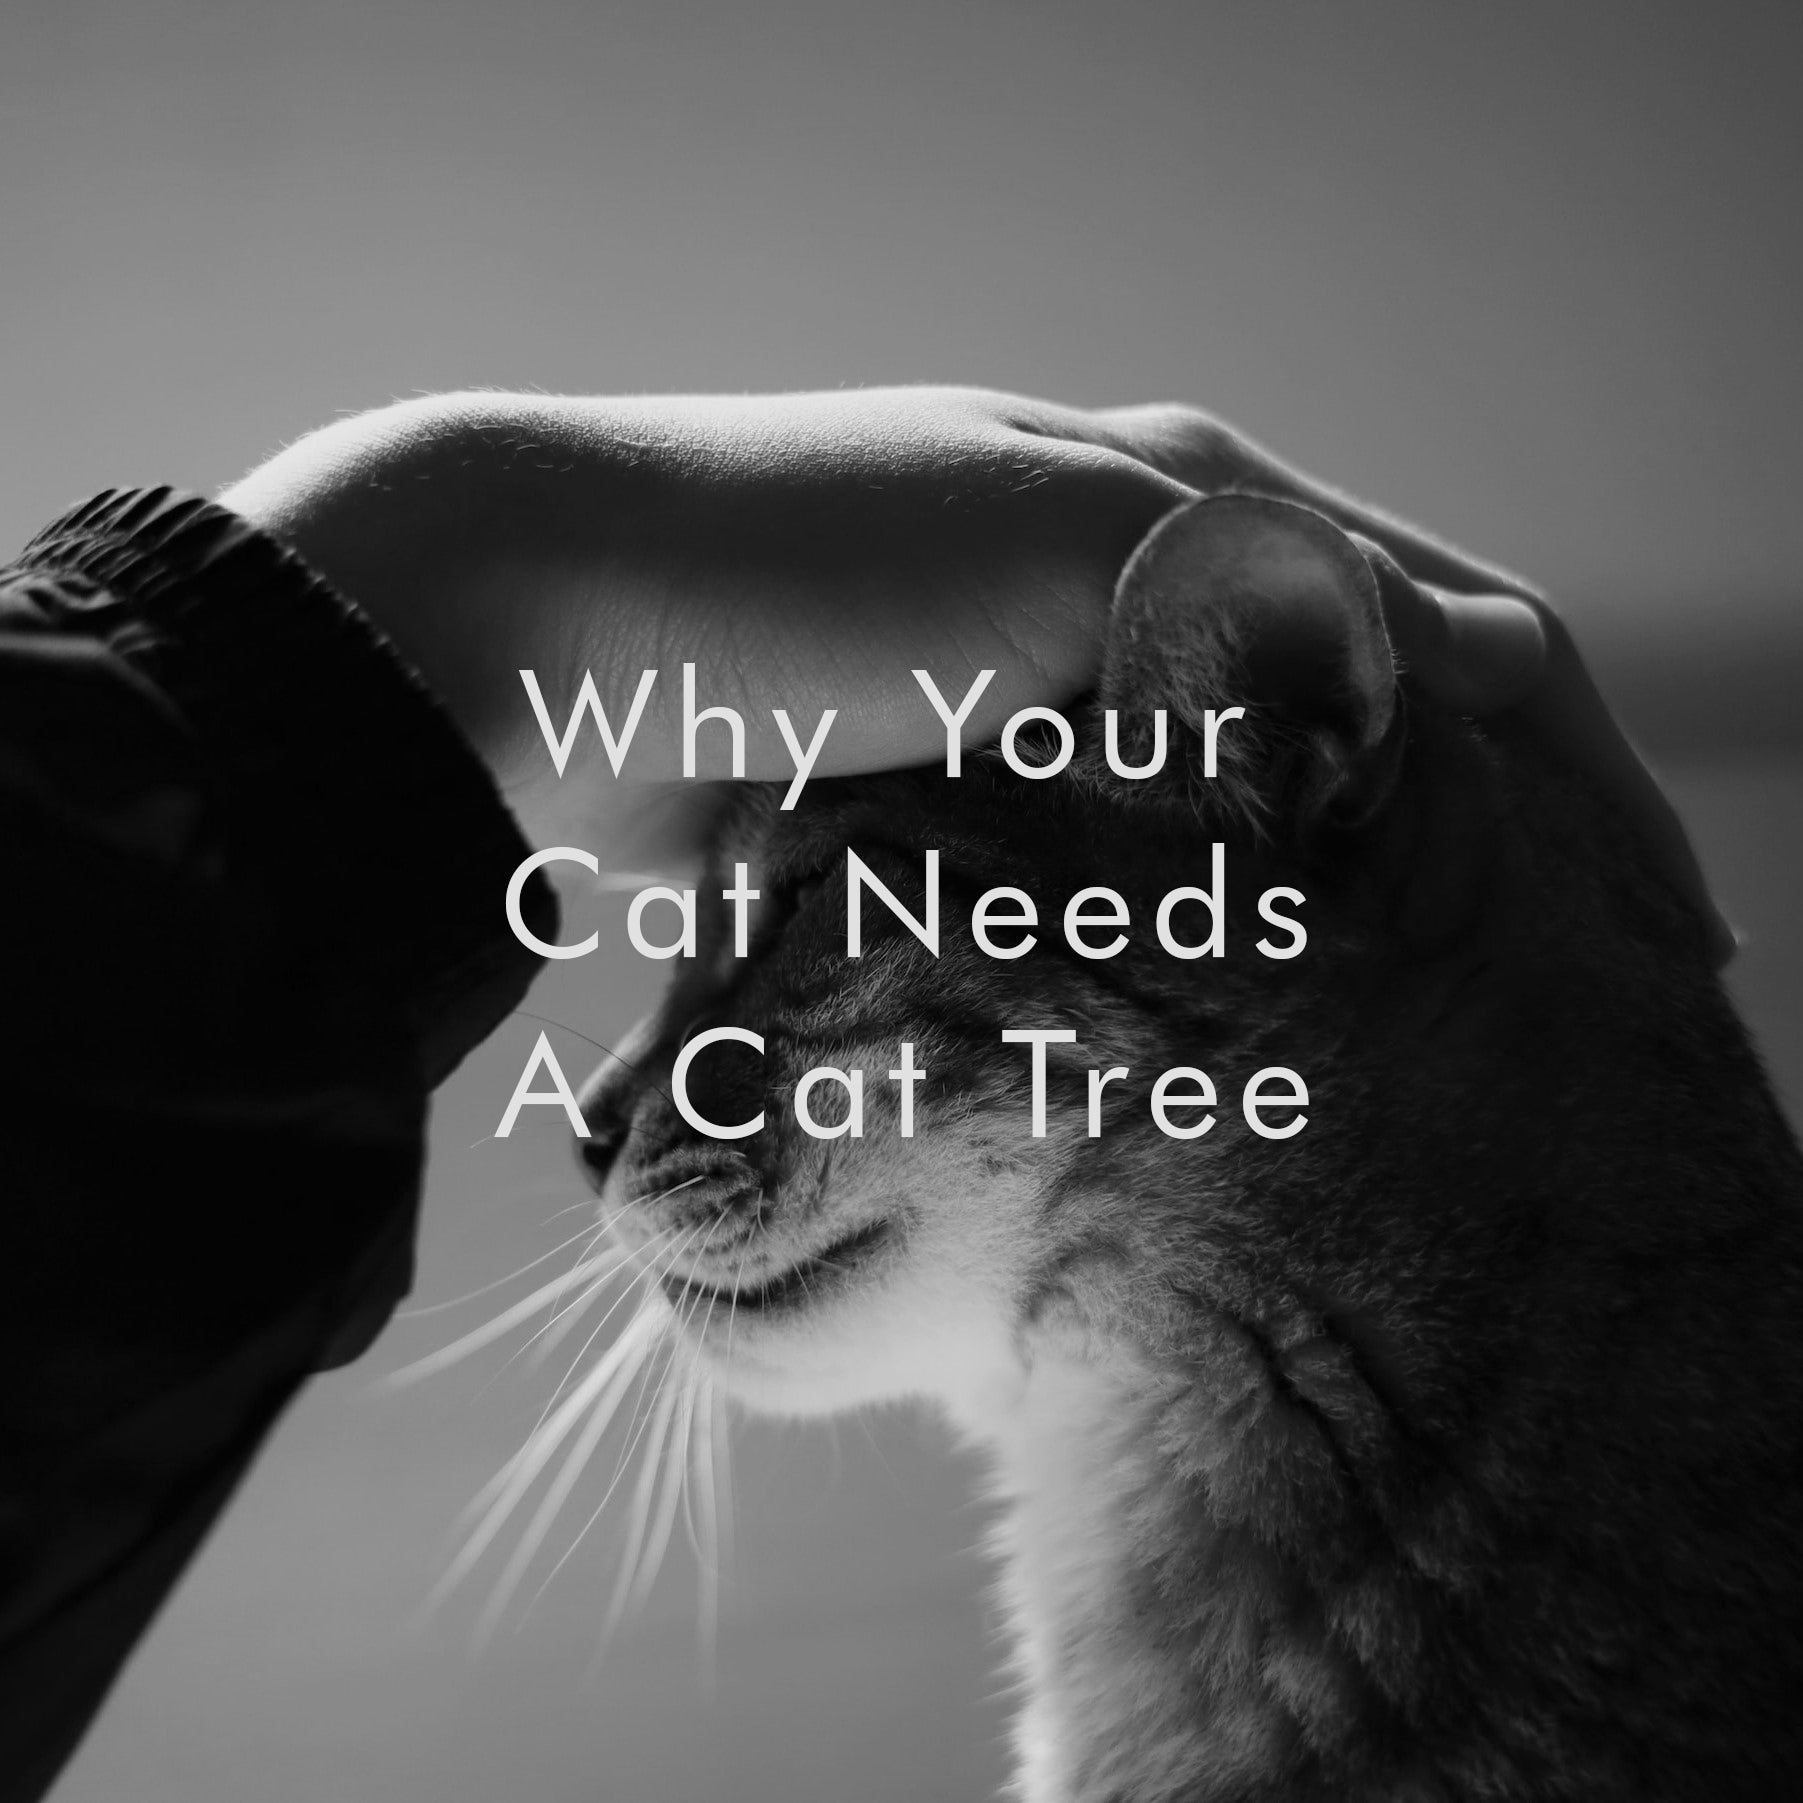 Why Your Cat Needs A Cat Tree